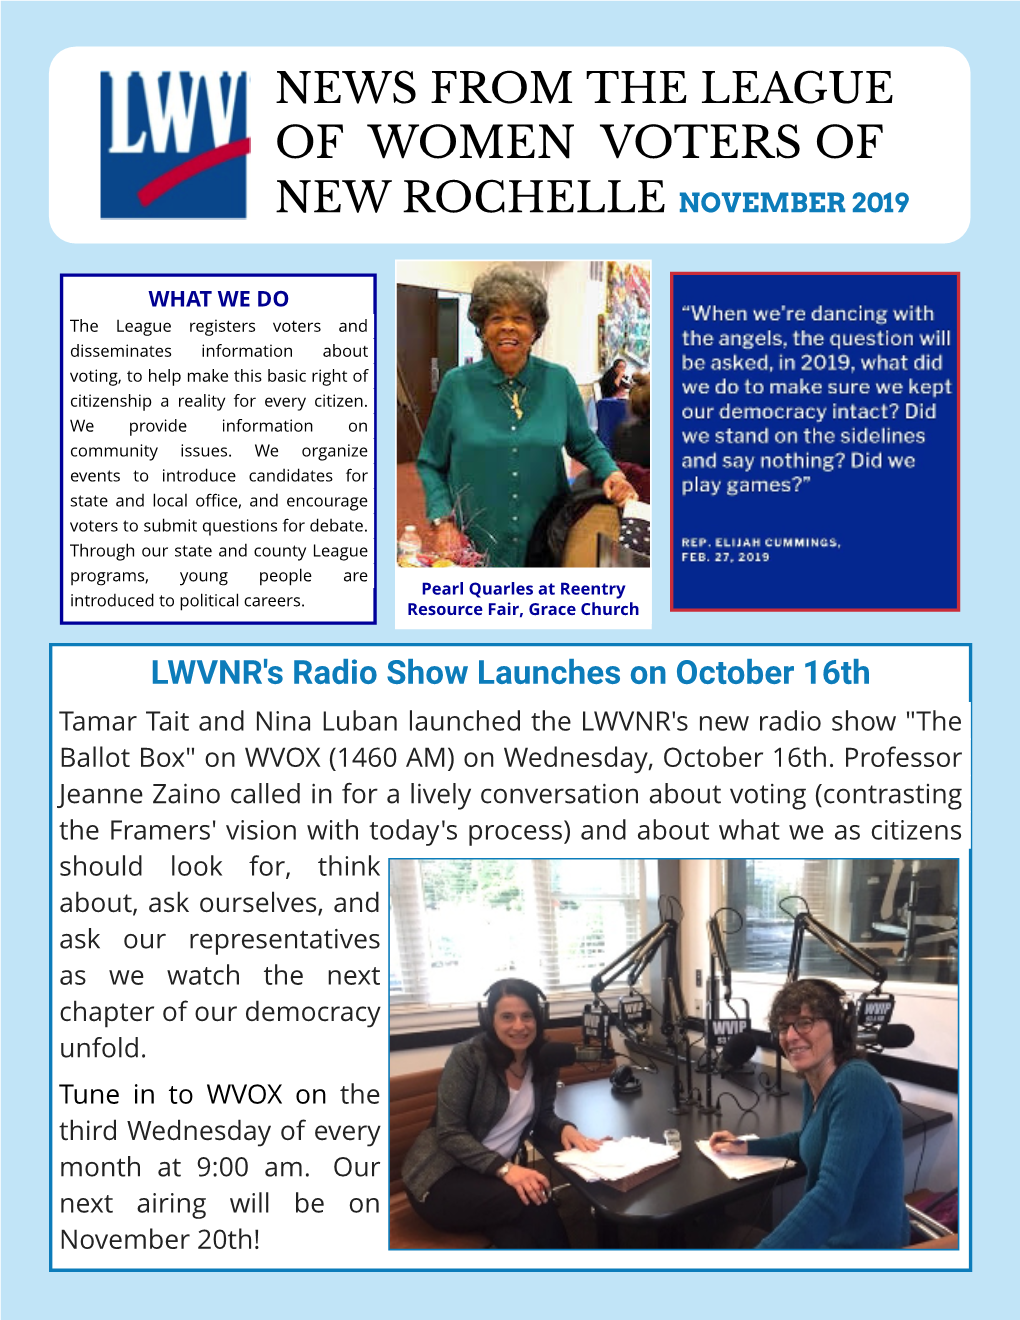 Of Women Voters of New Rochelle Held a Candidates Forum for Contested Seats for County Board of Legislators District #10, Mayor, and City Council Districts #1 and #5